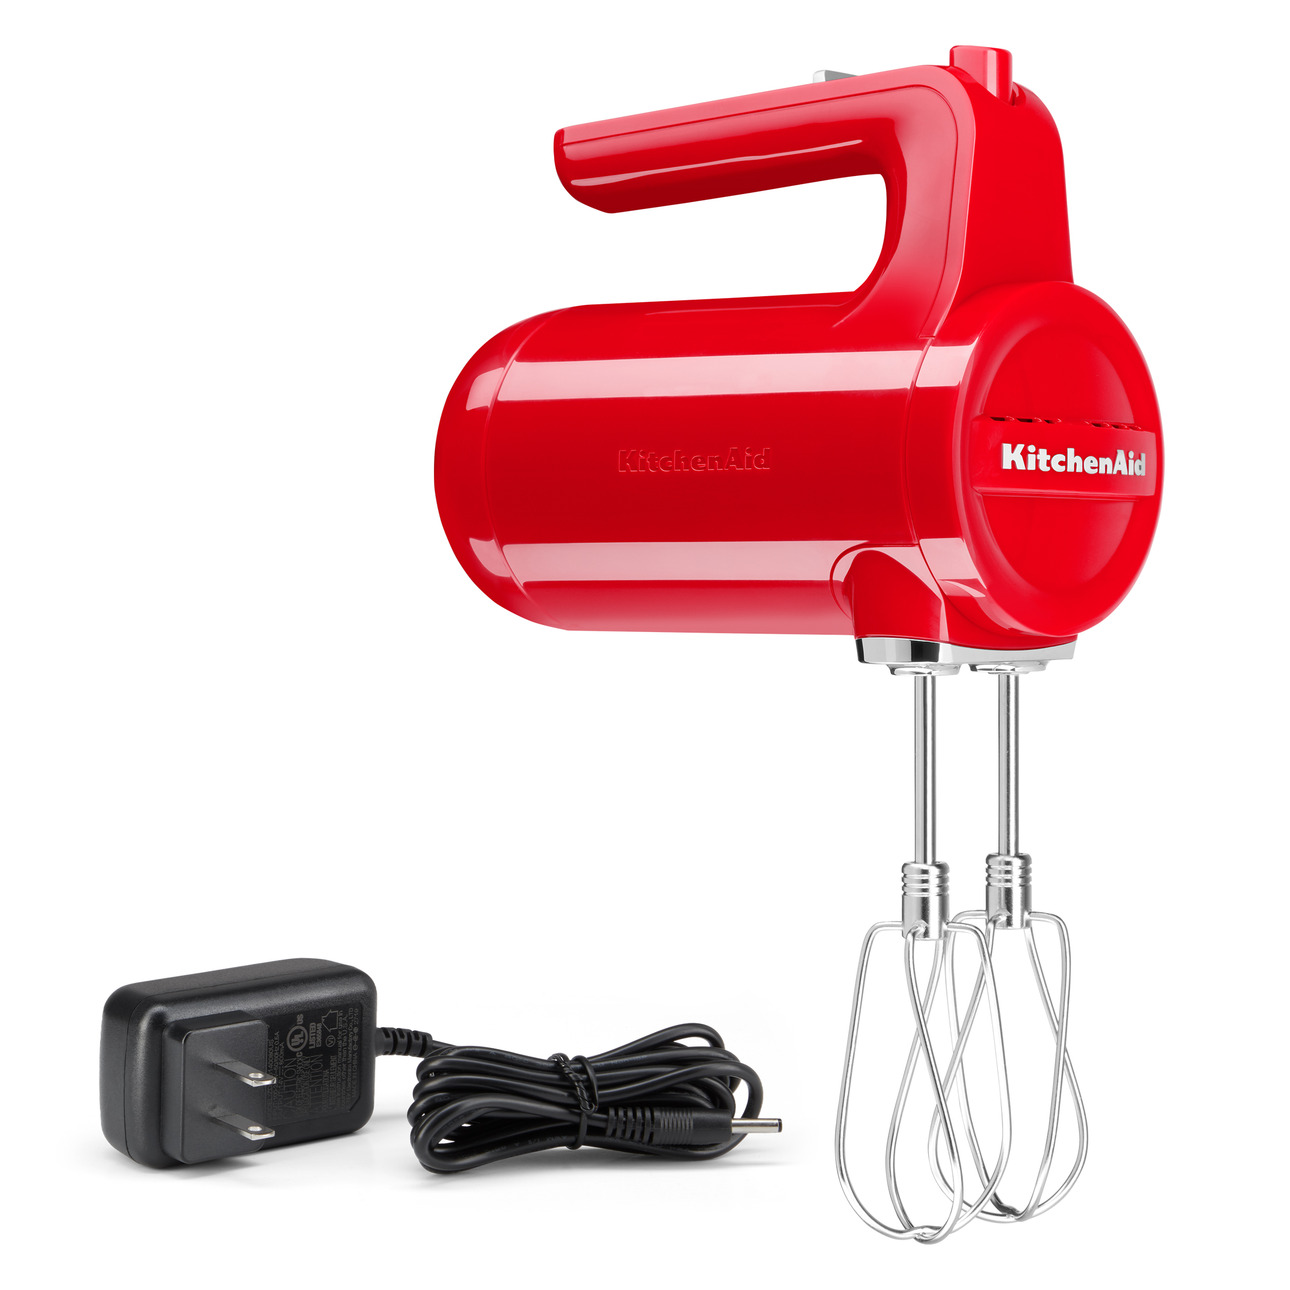 KitchenAid Cordless 7 Speed Hand Mixer, Passion Red, KHMB732 - image 1 of 6